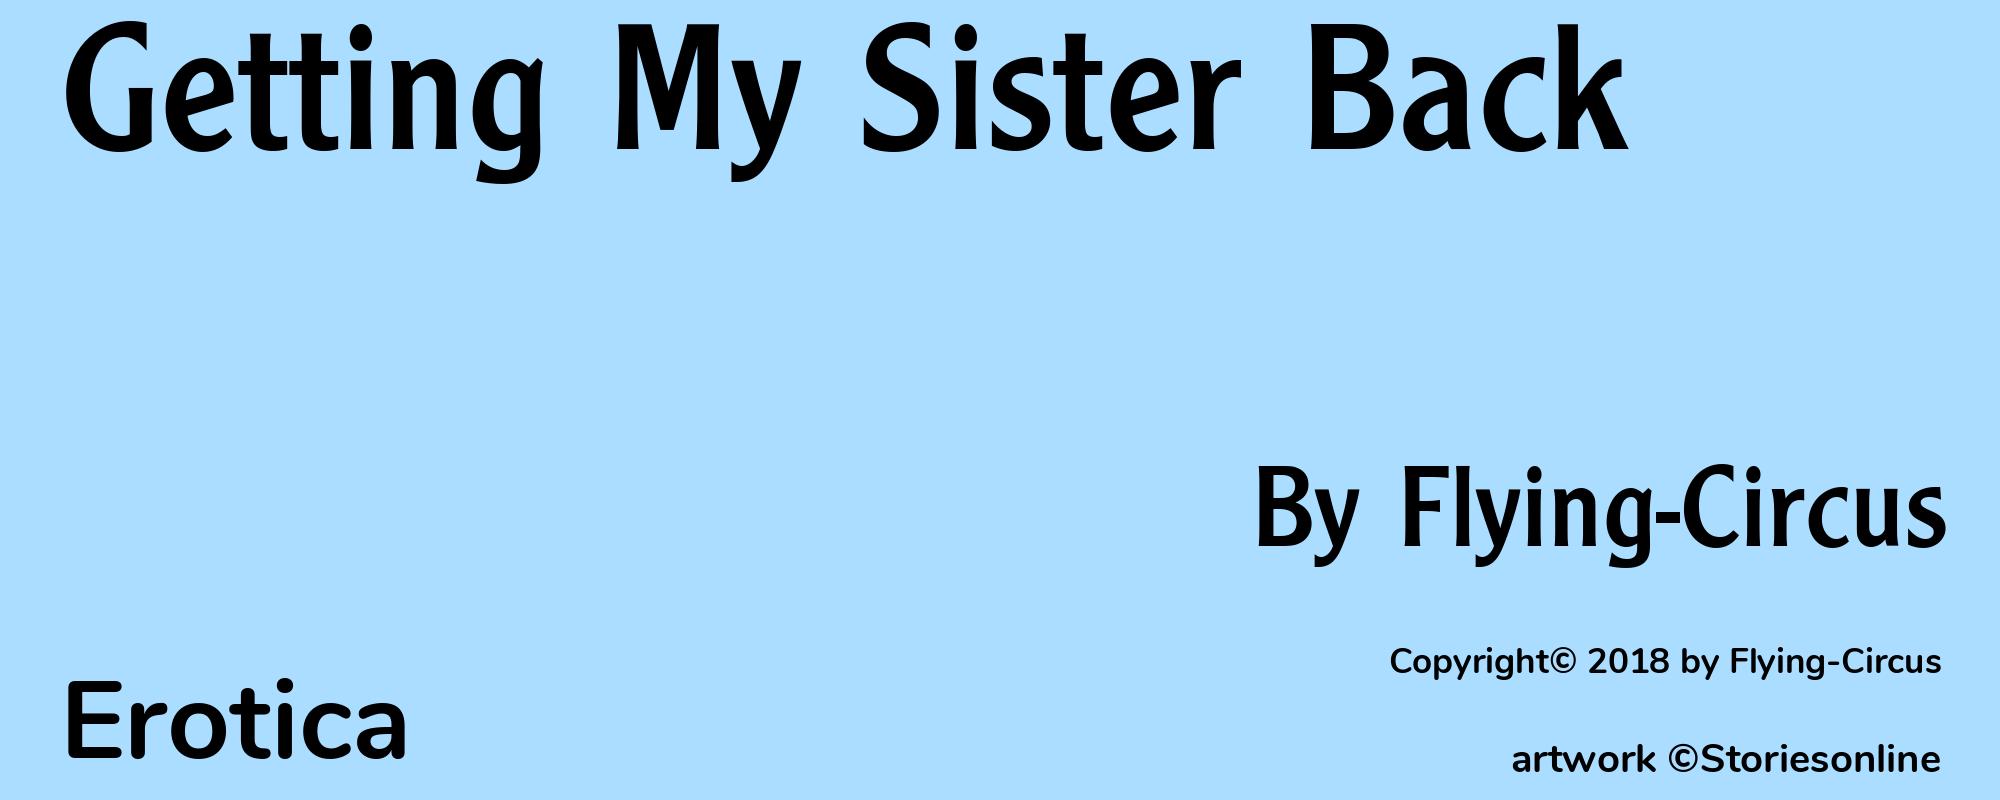 Getting My Sister Back - Cover